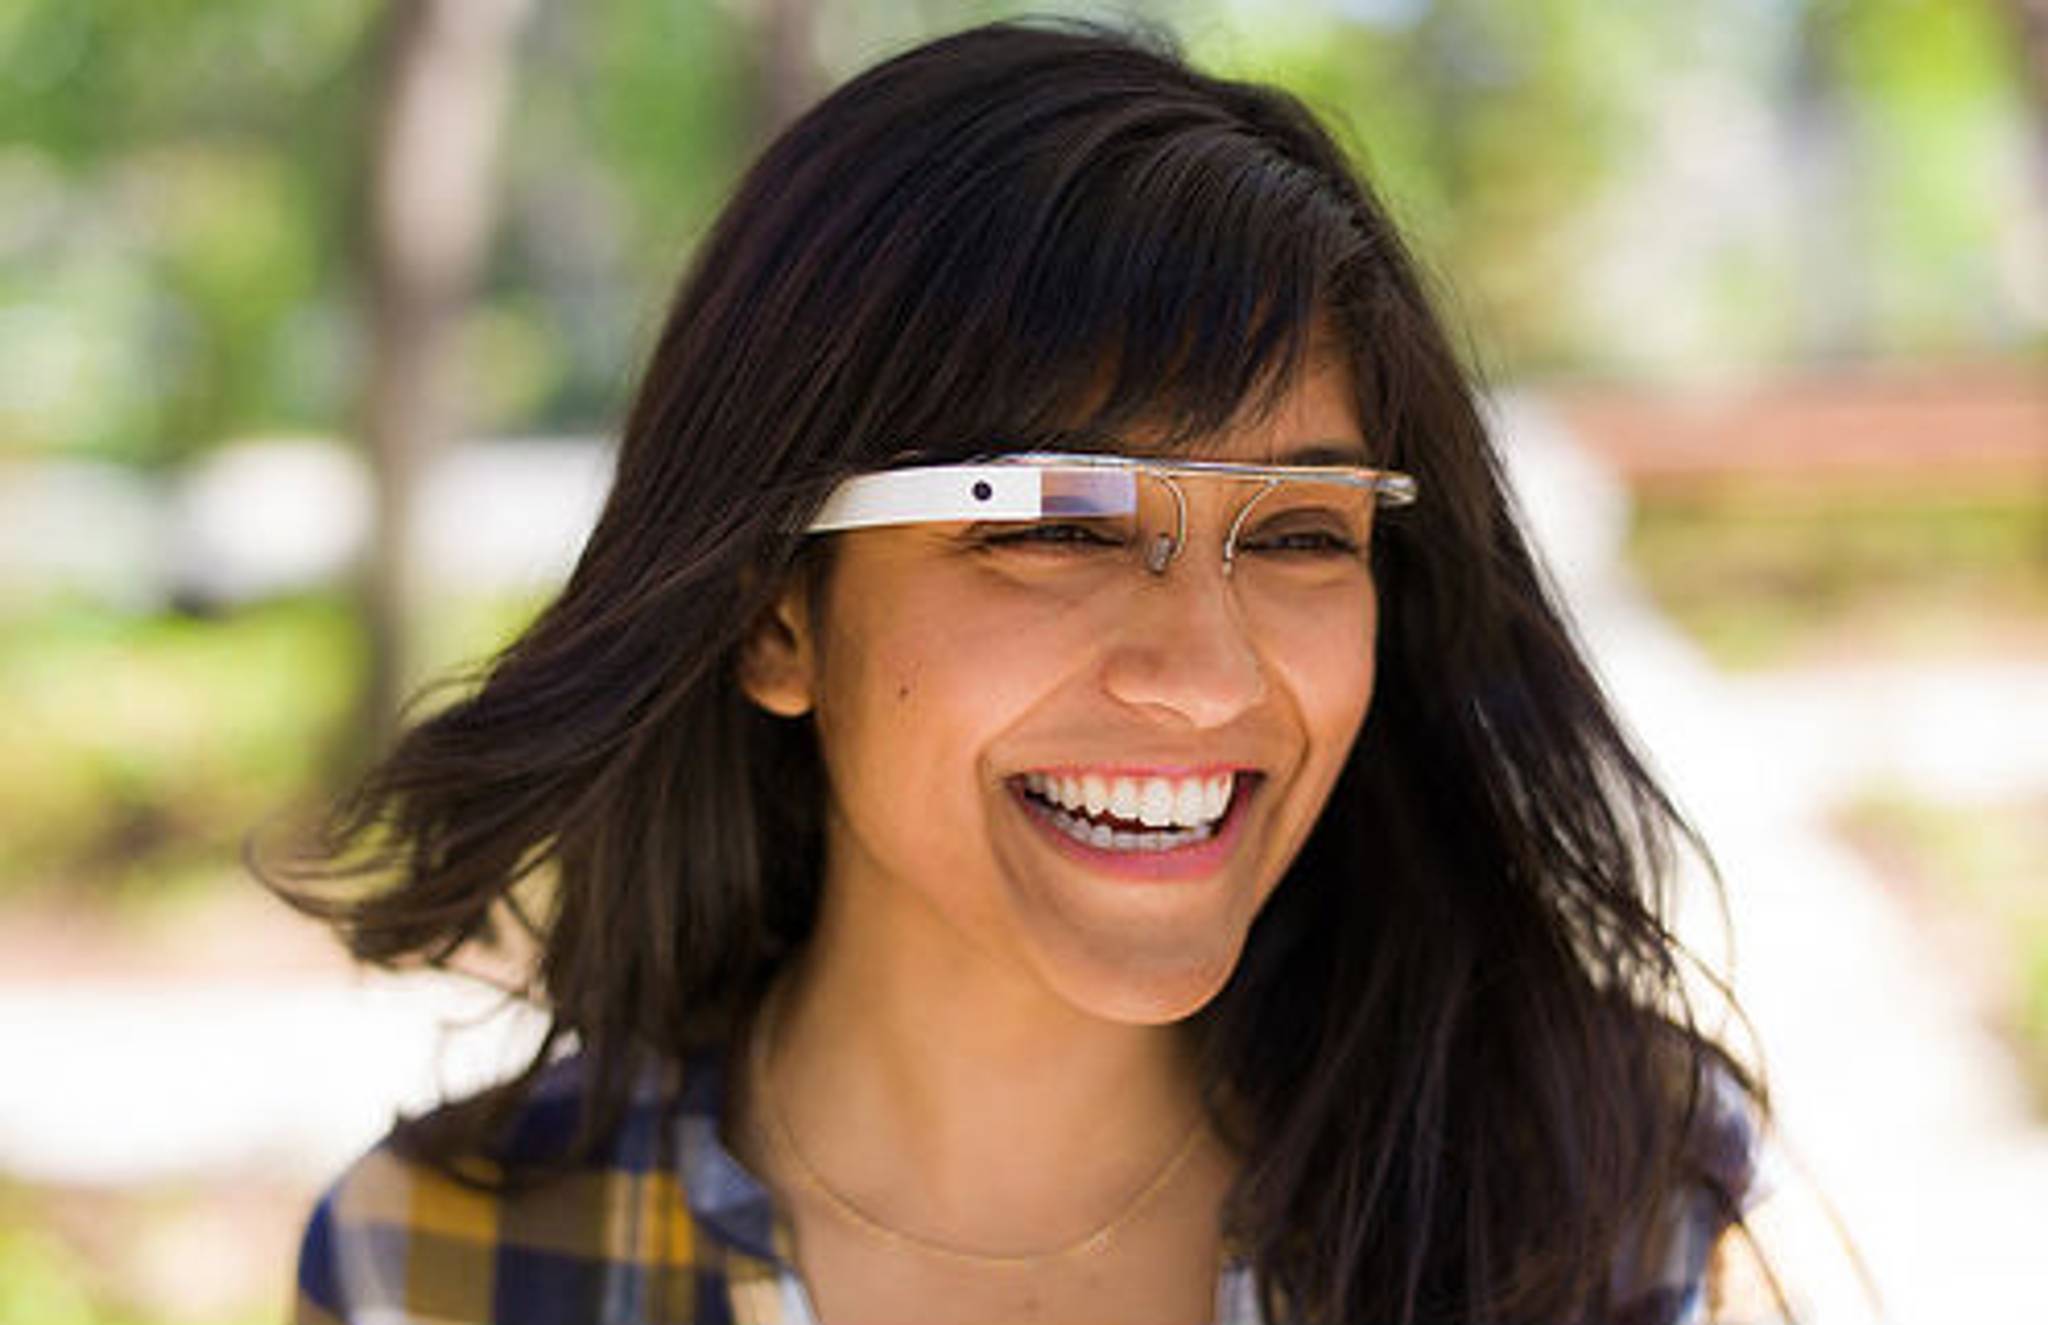 Checking in to the Google Glass Hotel